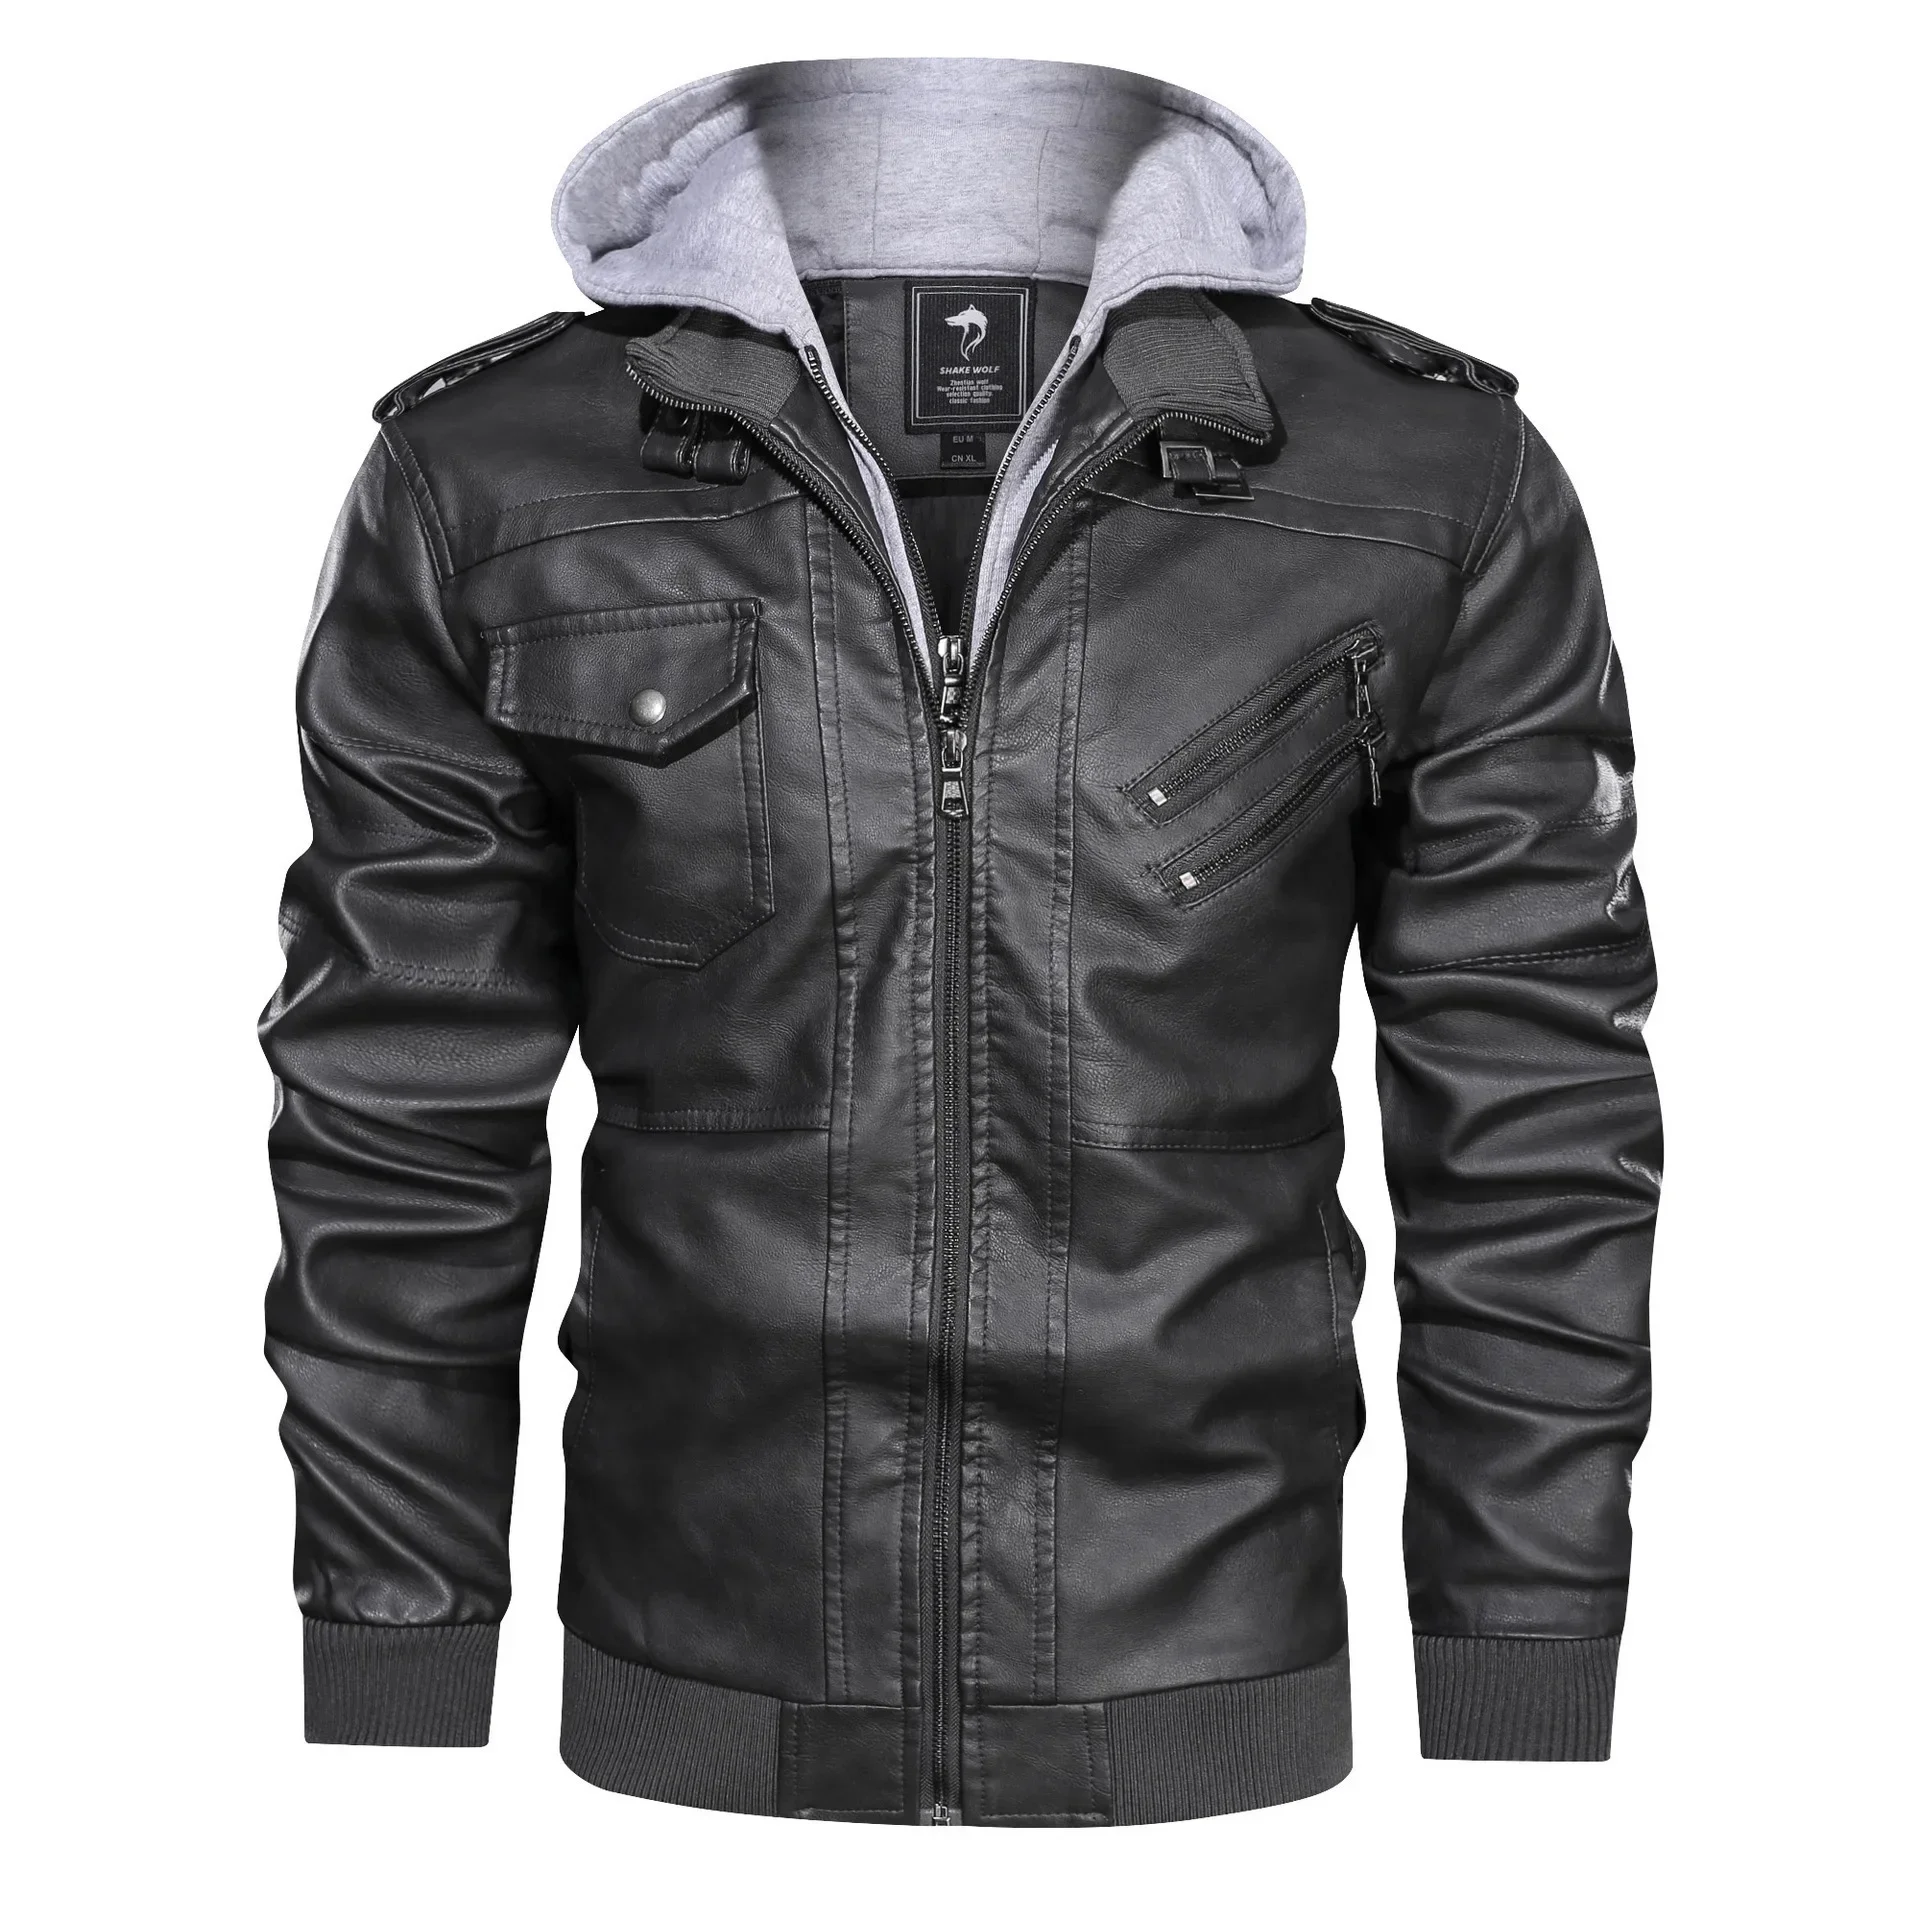 Leather Jackets Slim Casual Men Hooded Leather Coats New Fashion Male Street Wear Motorcycle Leather Jackets Hat Detachable 5XL men s sweater coats cardigans winter jackets cardigan sweaters male stand up collar casual slim fit size 4xl